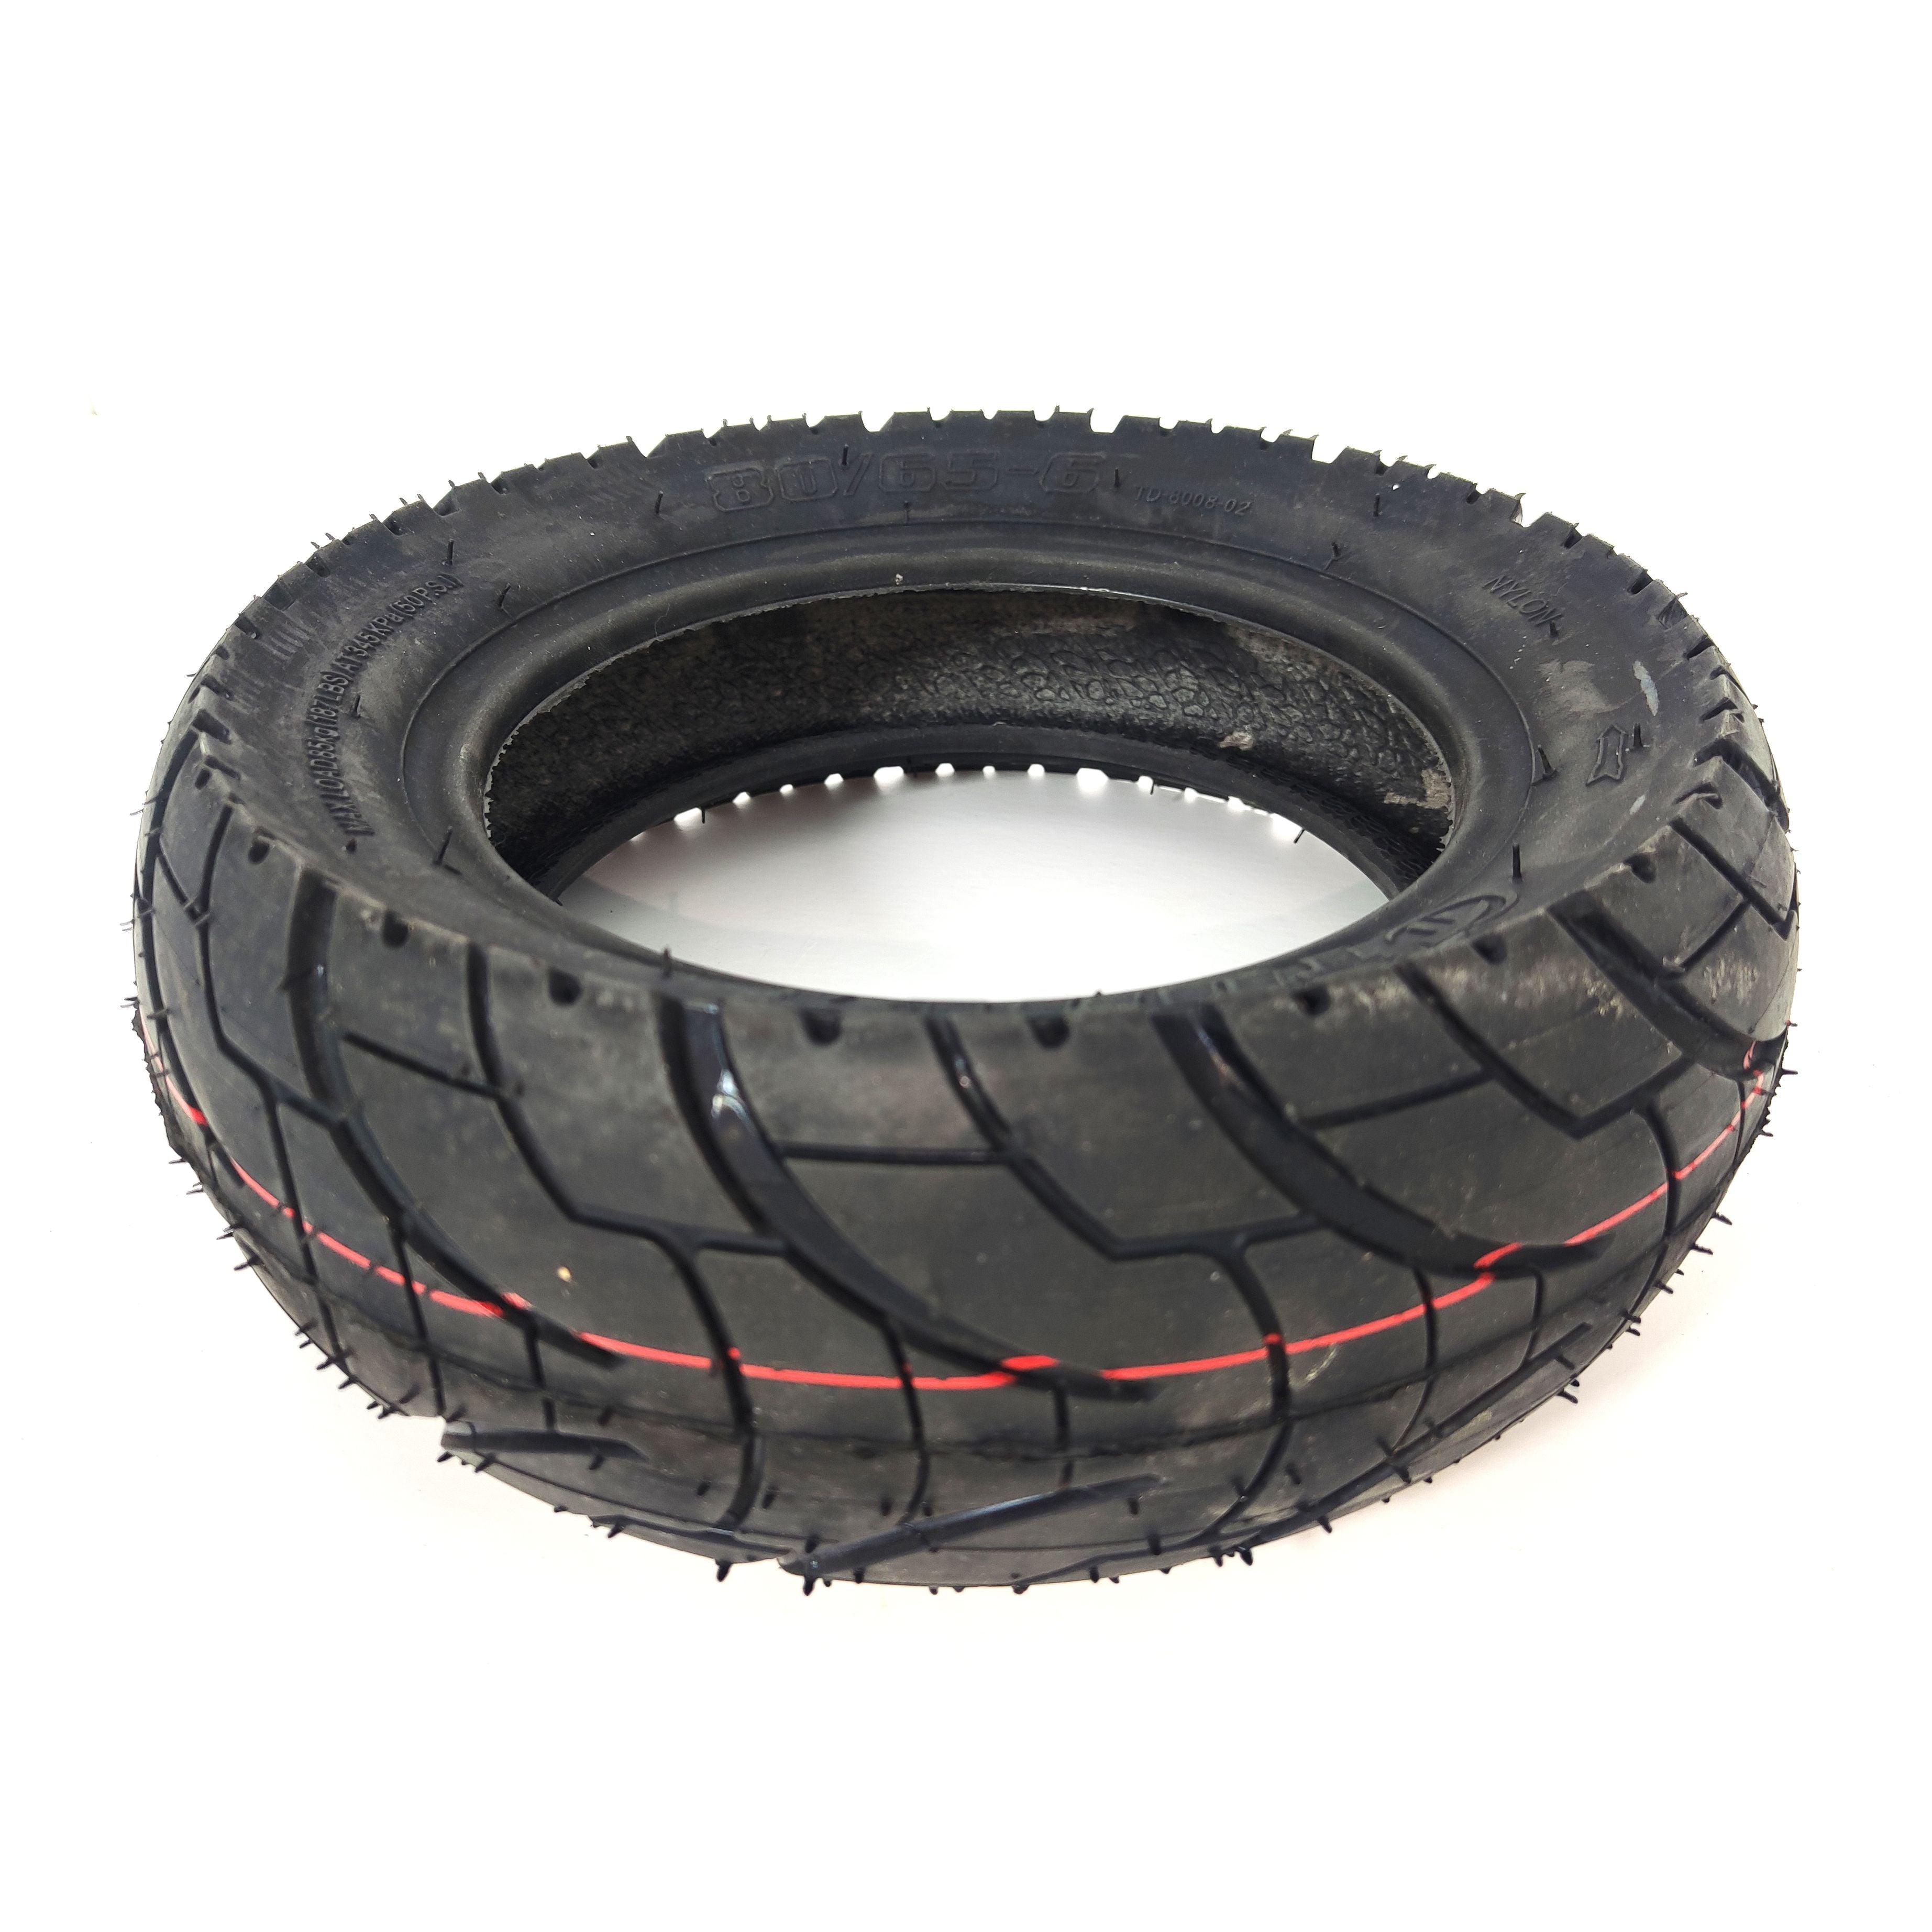 S-scooter road tire